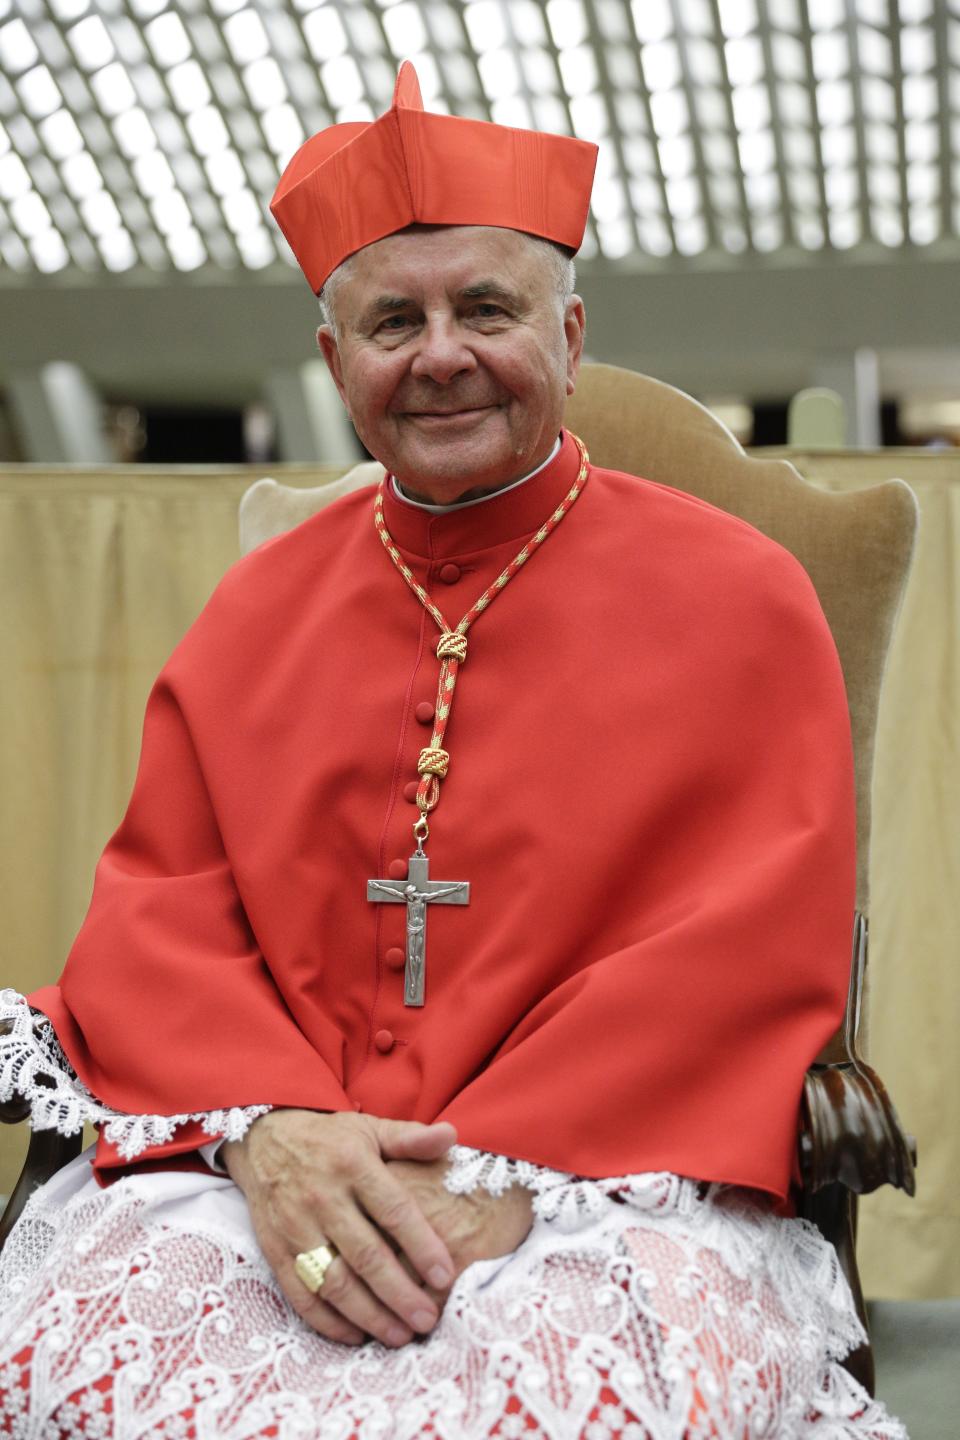 Cardinal Sigitas Tamkevicius poses for photographers prior to meeting relatives and friends after he was elevated to cardinal by Pope Francis, at the Vatican, Saturday, Oct. 5, 2019. Pope Francis has chosen 13 men he admires and whose sympathies align with his to become the Catholic Church's newest cardinals. (AP Photo/Andrew Medichini)